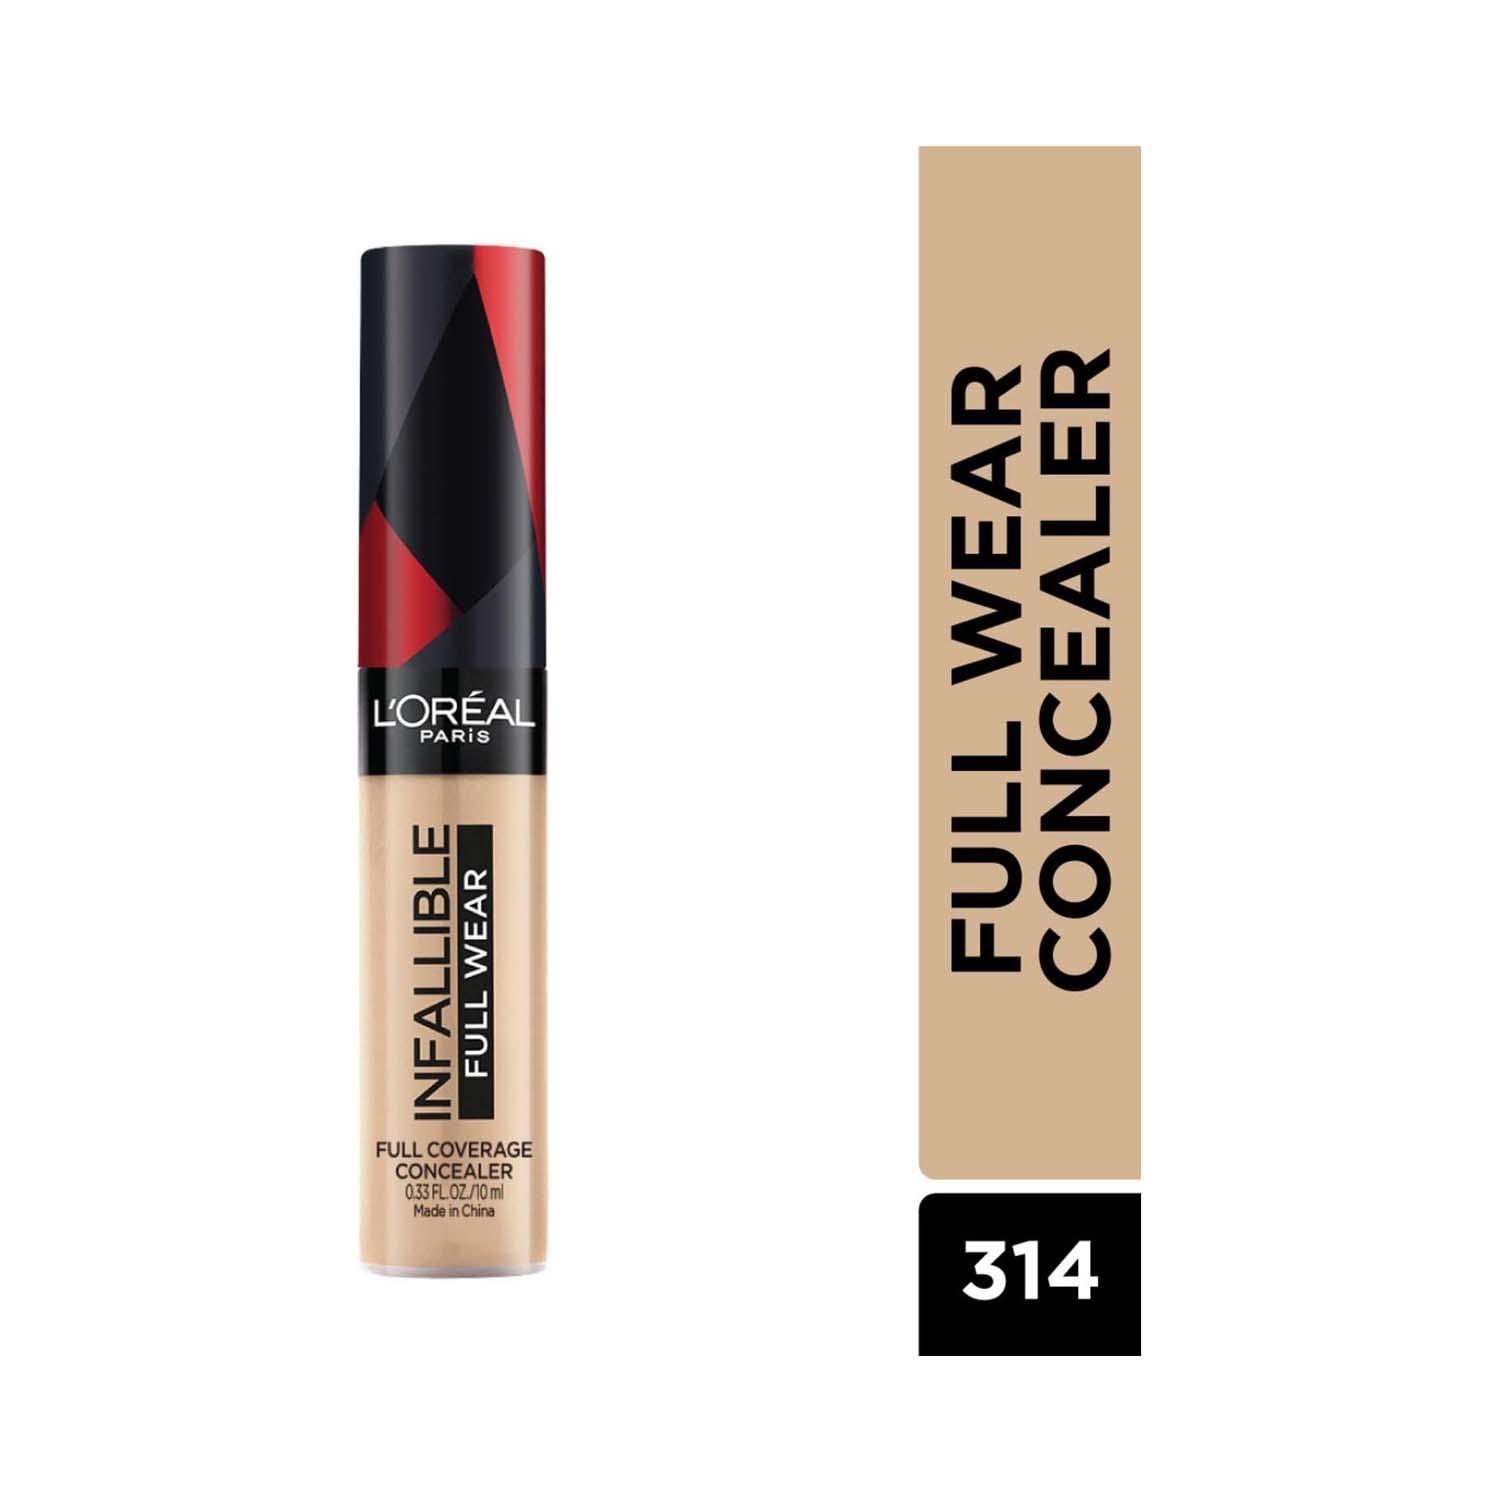 L'Oreal Paris Infallible Full Wear More Than Concealer - 314 (10ml)